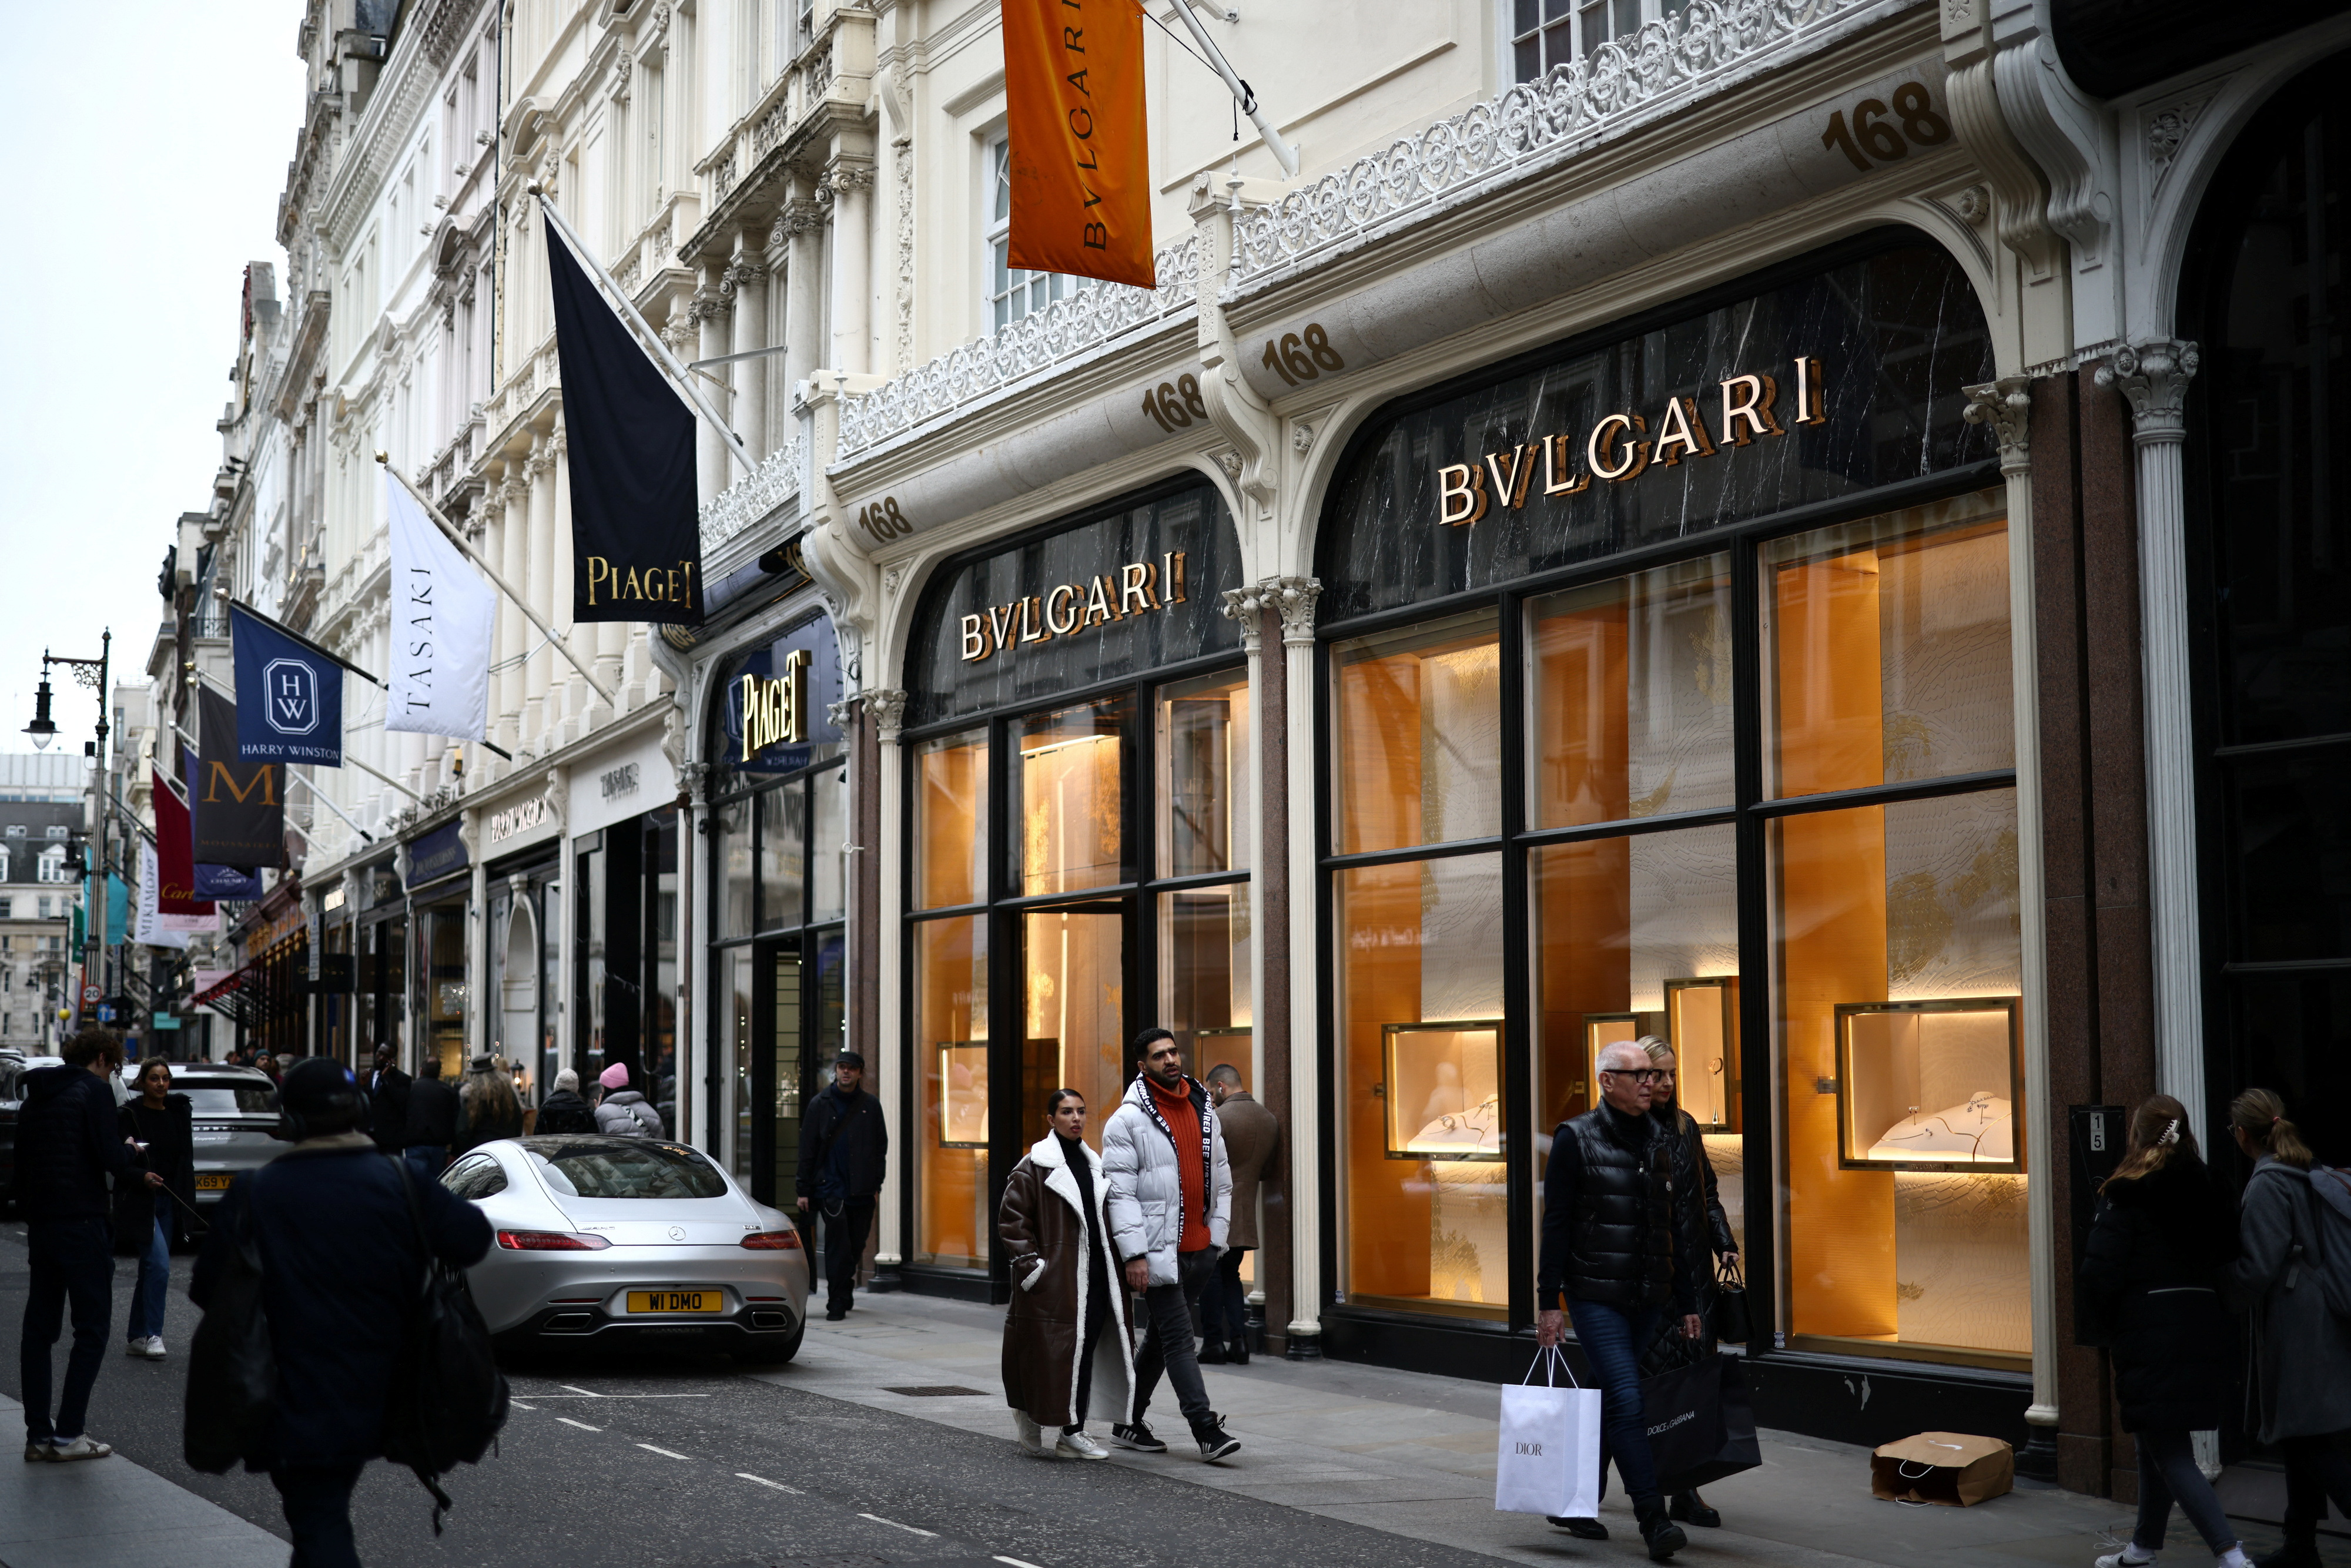 London Is Losing Its Crown as a Luxury Shopping Destination - WSJ